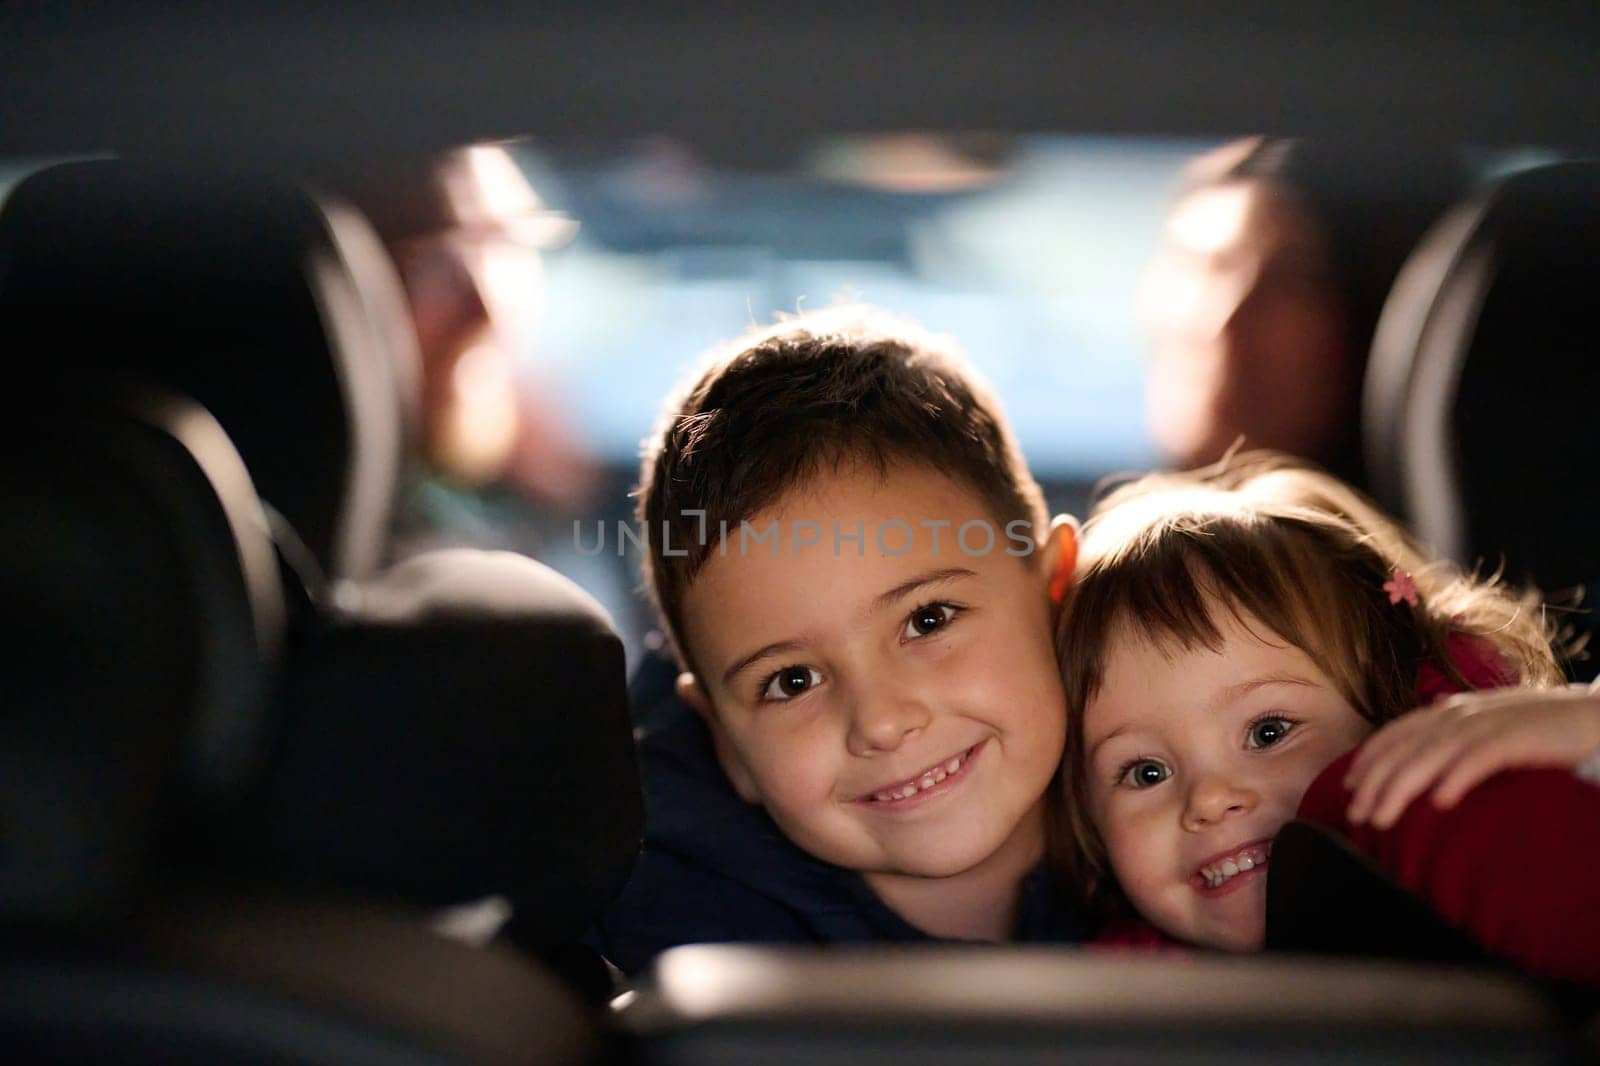 A young brother and sister enjoying a car ride together, immersed in the adventure of travel.